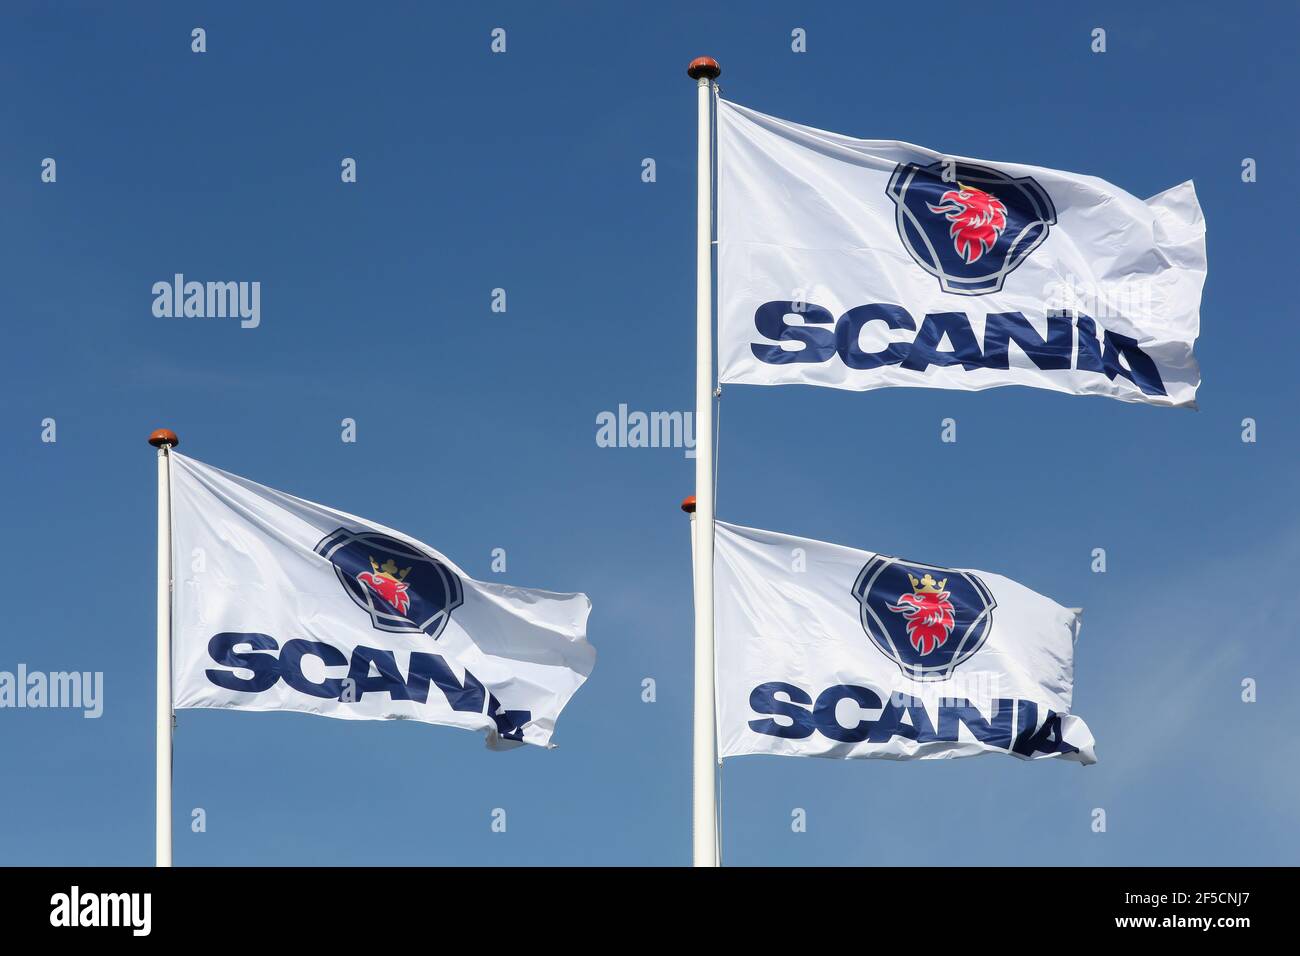 Vejle, Denmark - September 10, 2016: Scania flags waving in the sky. Scania is a major swedish automotive industry manufacturer of heavy trucks Stock Photo